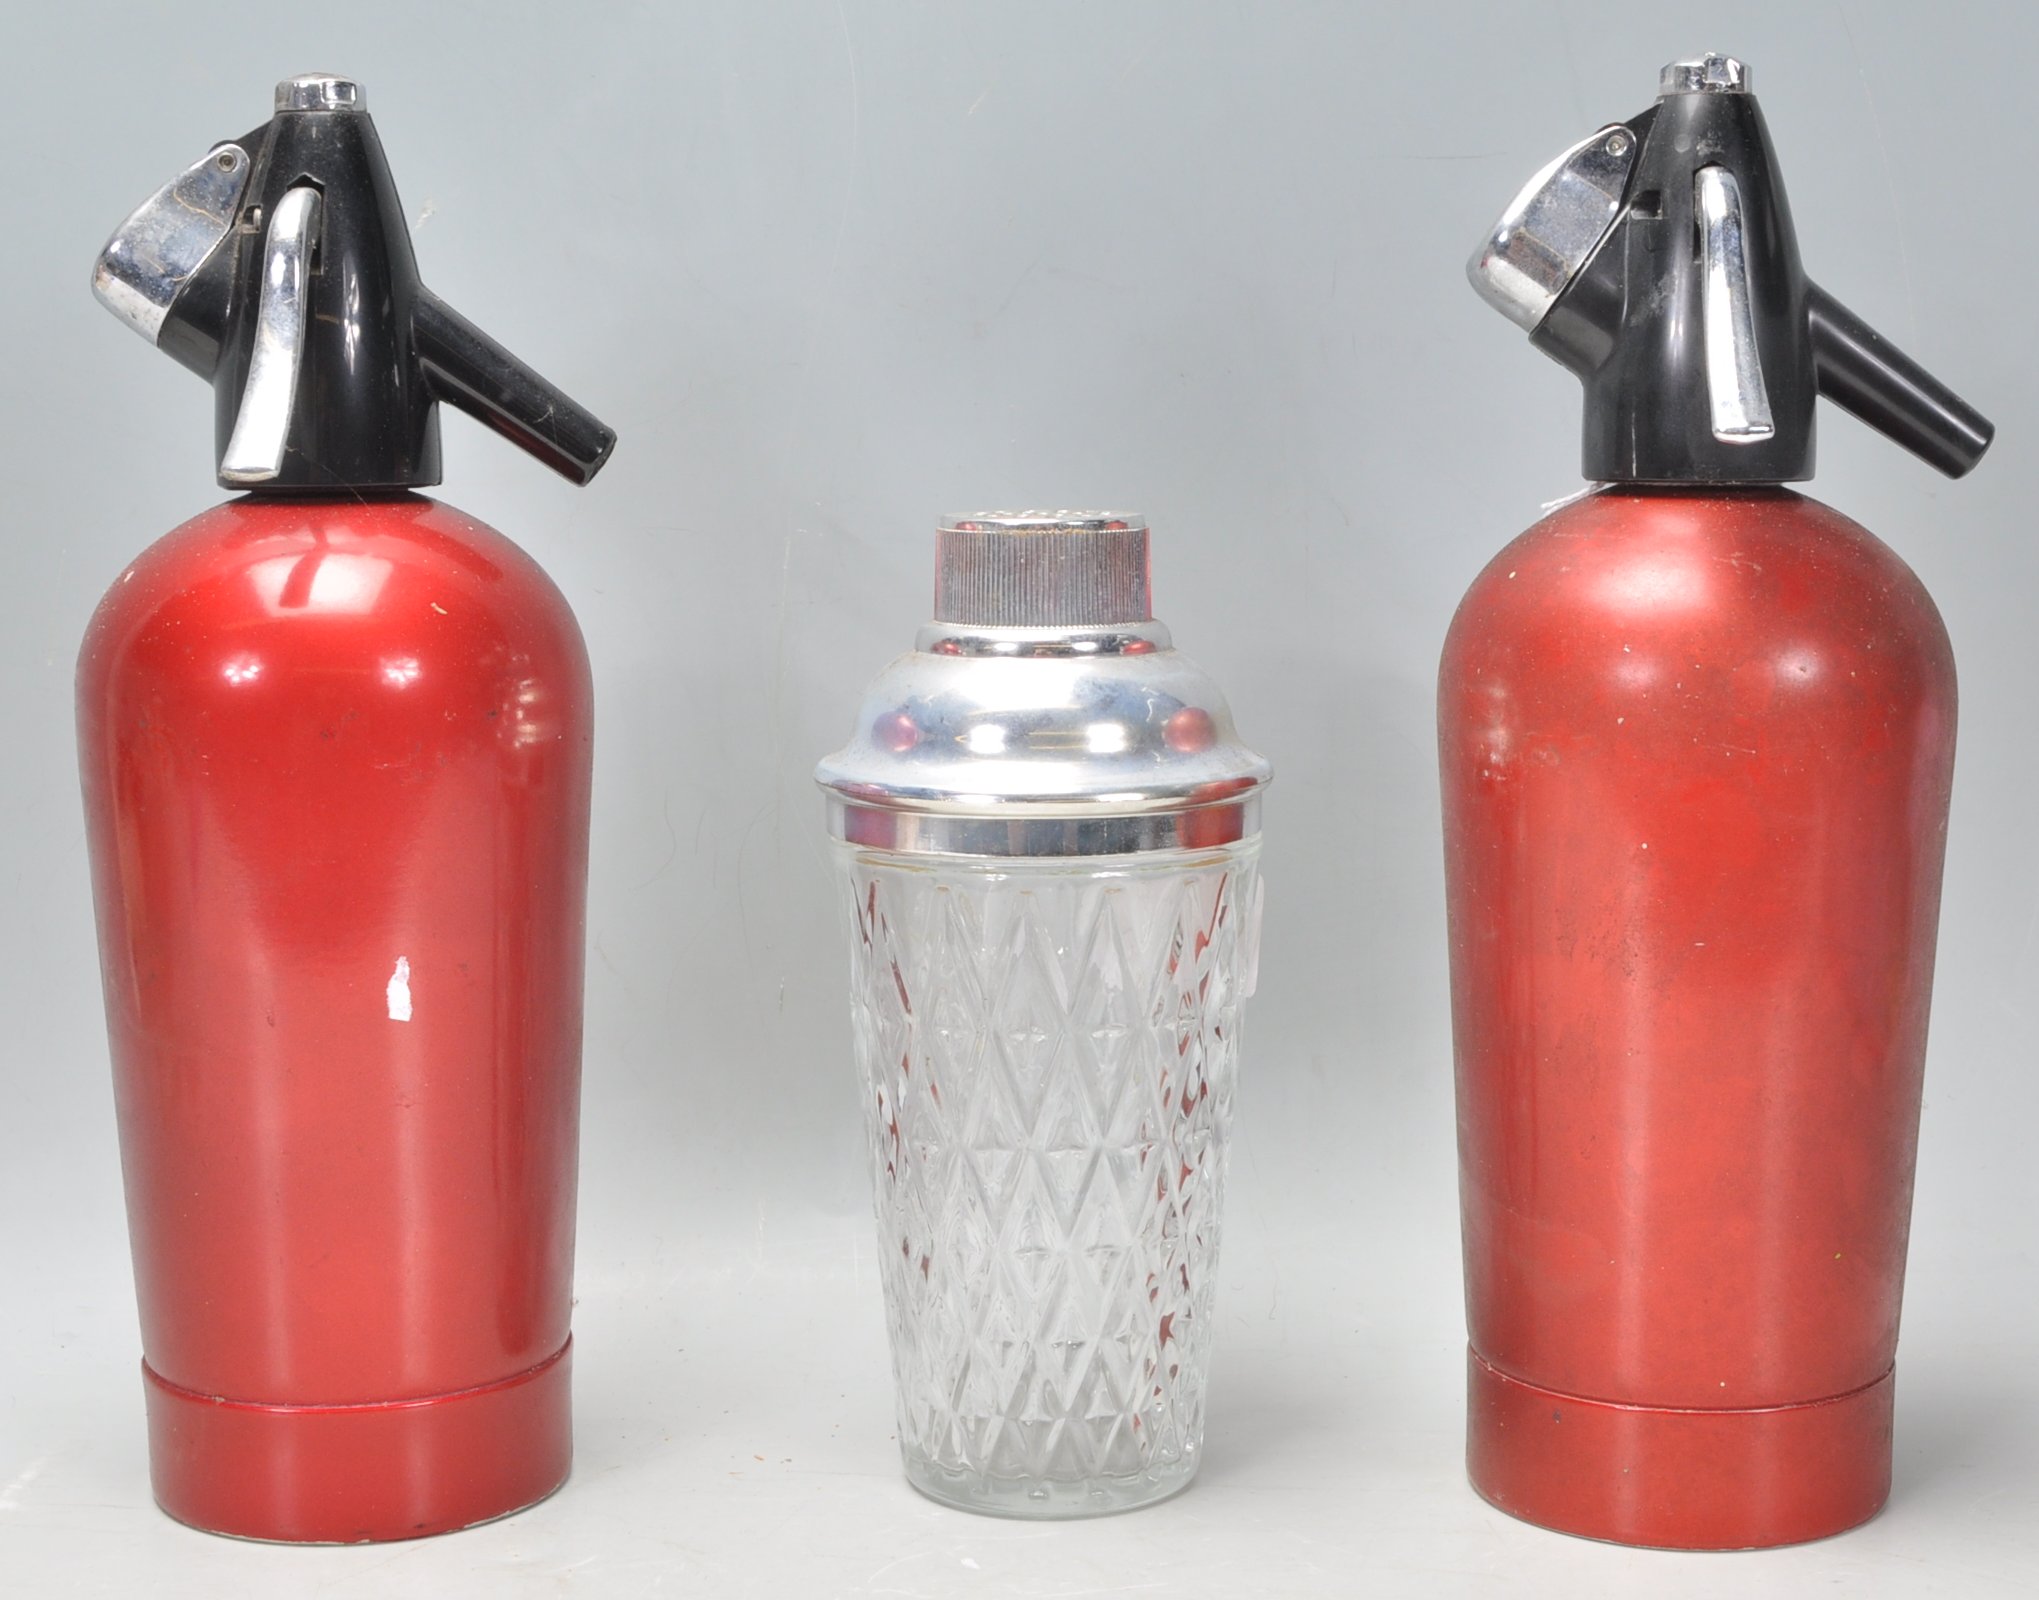 A pair of vintage retro soda siphons with red metallic paint work together with a cut glass cocktail